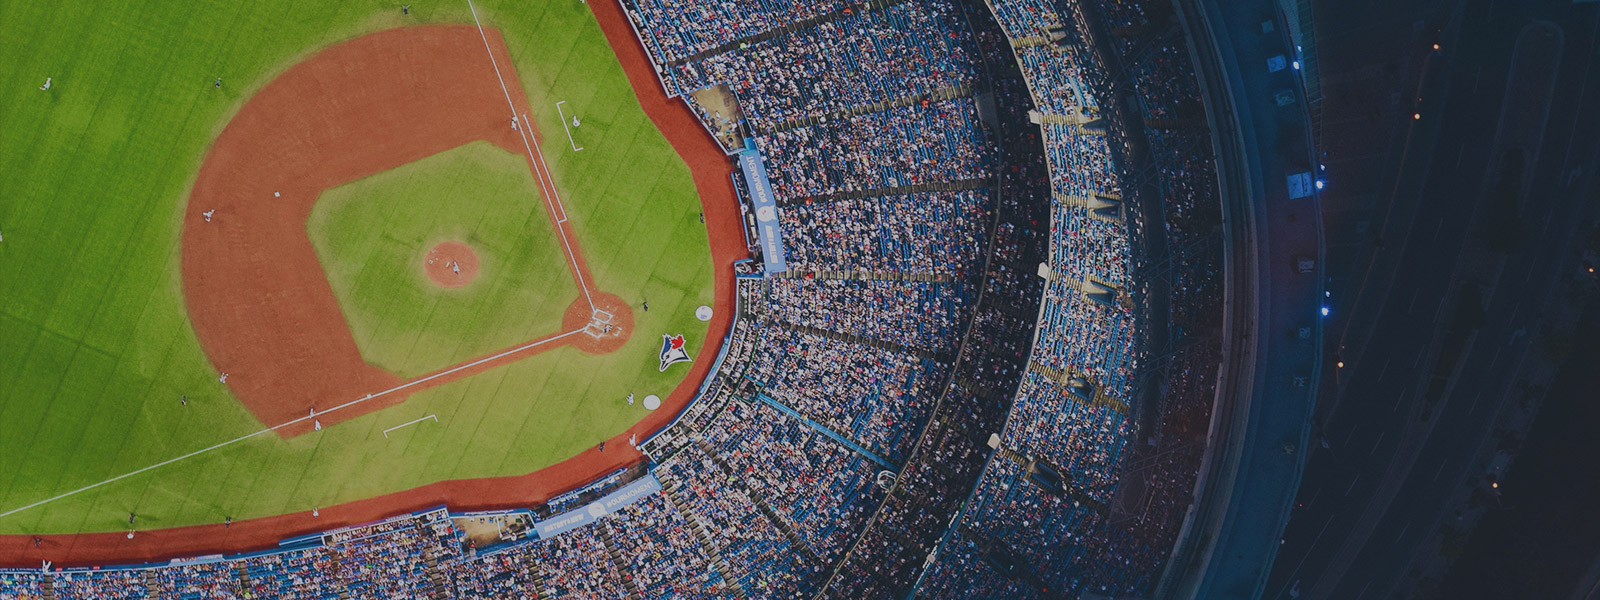 Moneyball: The Analysis of a Real Estate Agent Background Image